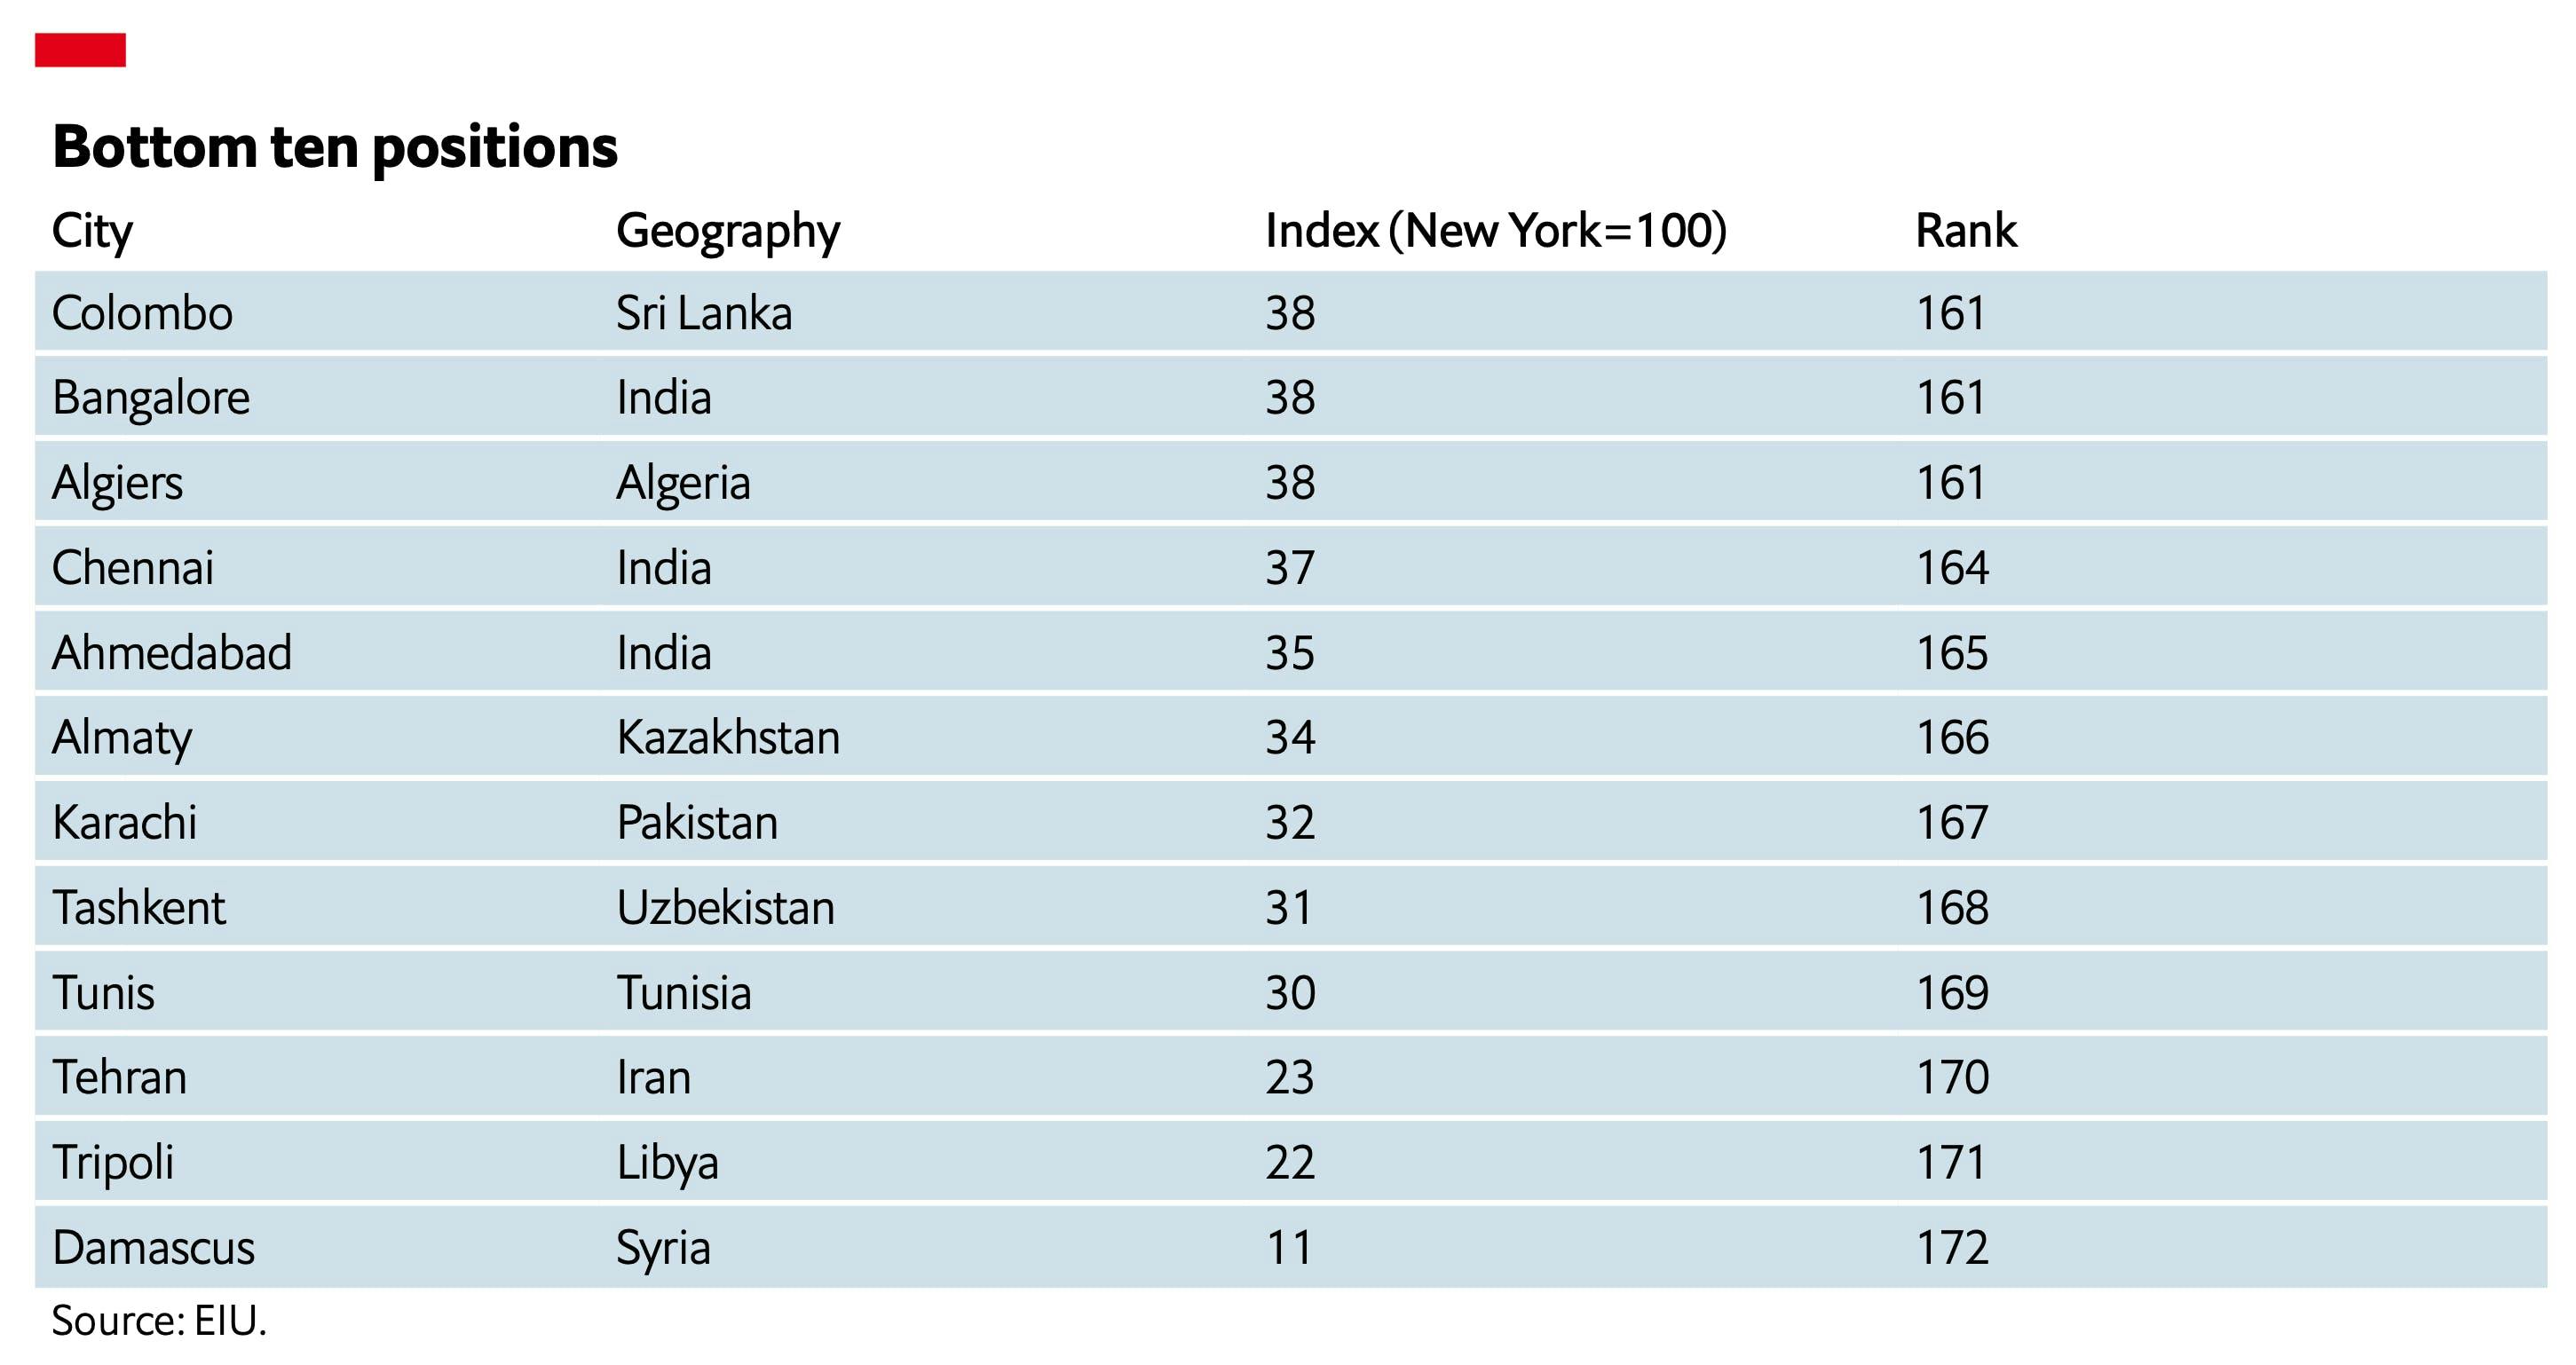 Pakistan's Karachi is the world’s 6th cheapest city in The Economist ranking of 172 global cities